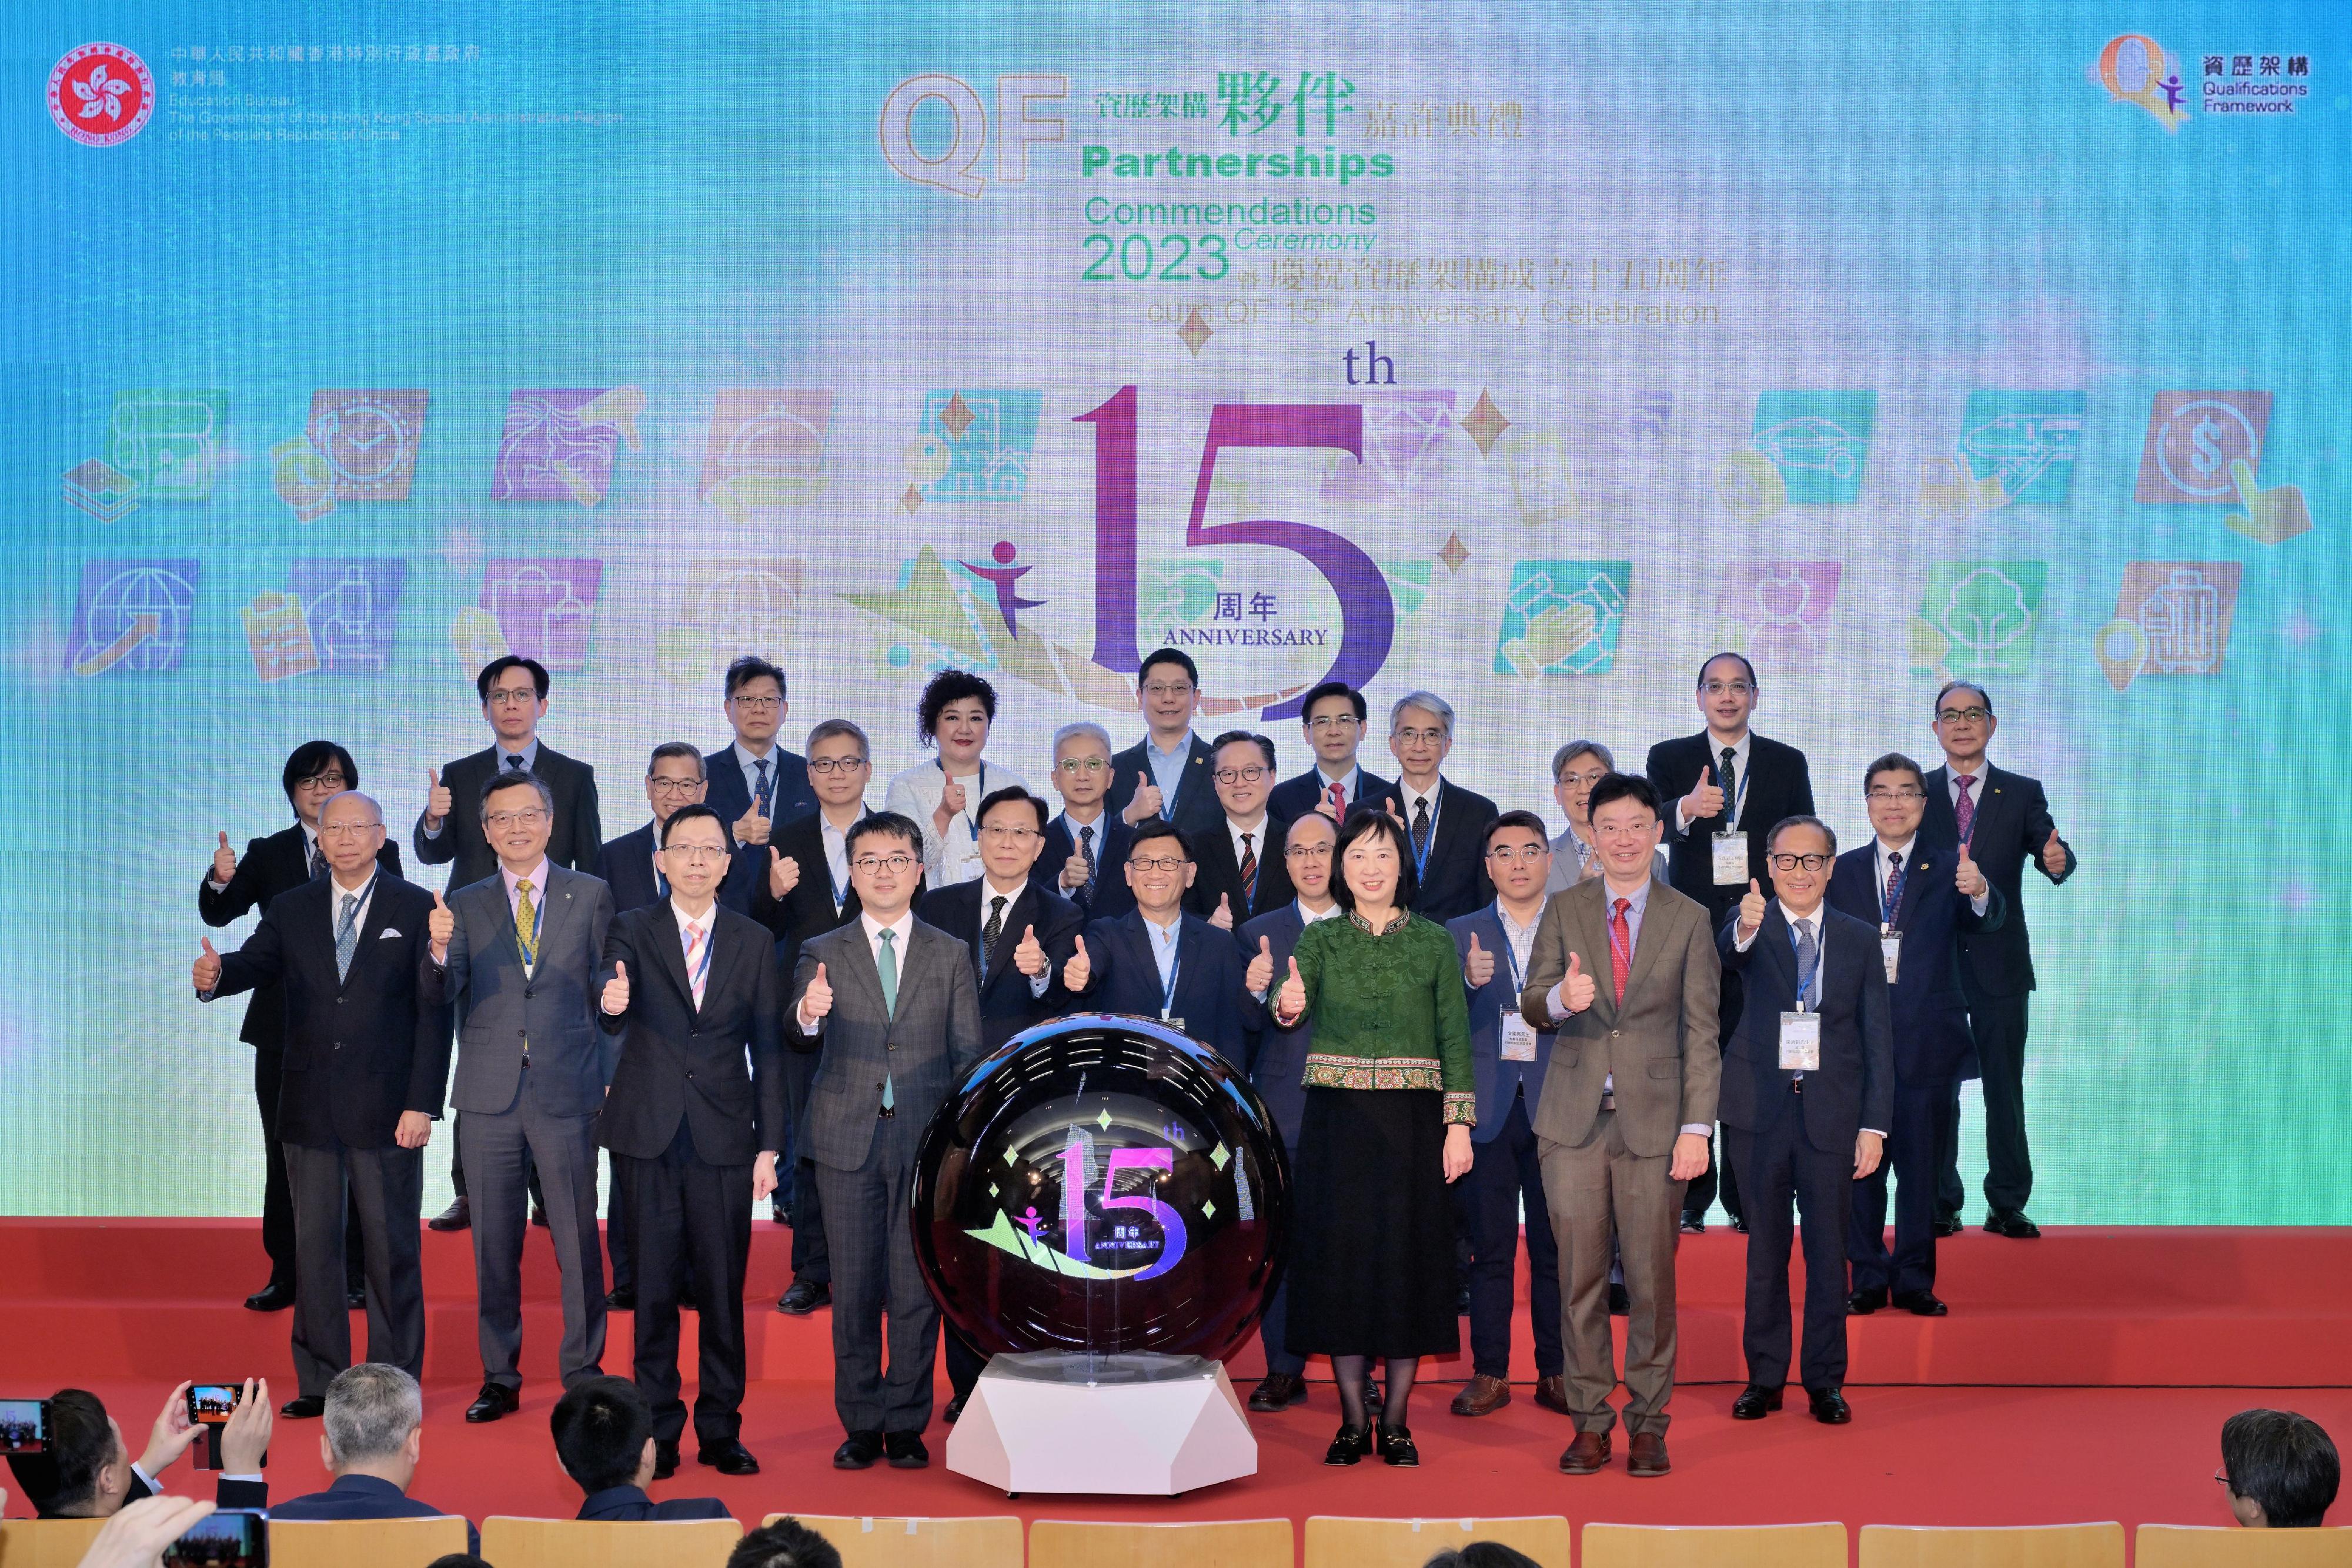 The Acting Secretary for Education, Mr Sze Chun-fai (front row, second left), officiated at the Qualifications Framework (QF) Partnerships Commendation Ceremony cum QF 15th Anniversary Celebration today (May 10) with the Permanent Secretary for Education, Ms Michelle Li (front row, second right), and other guests.
